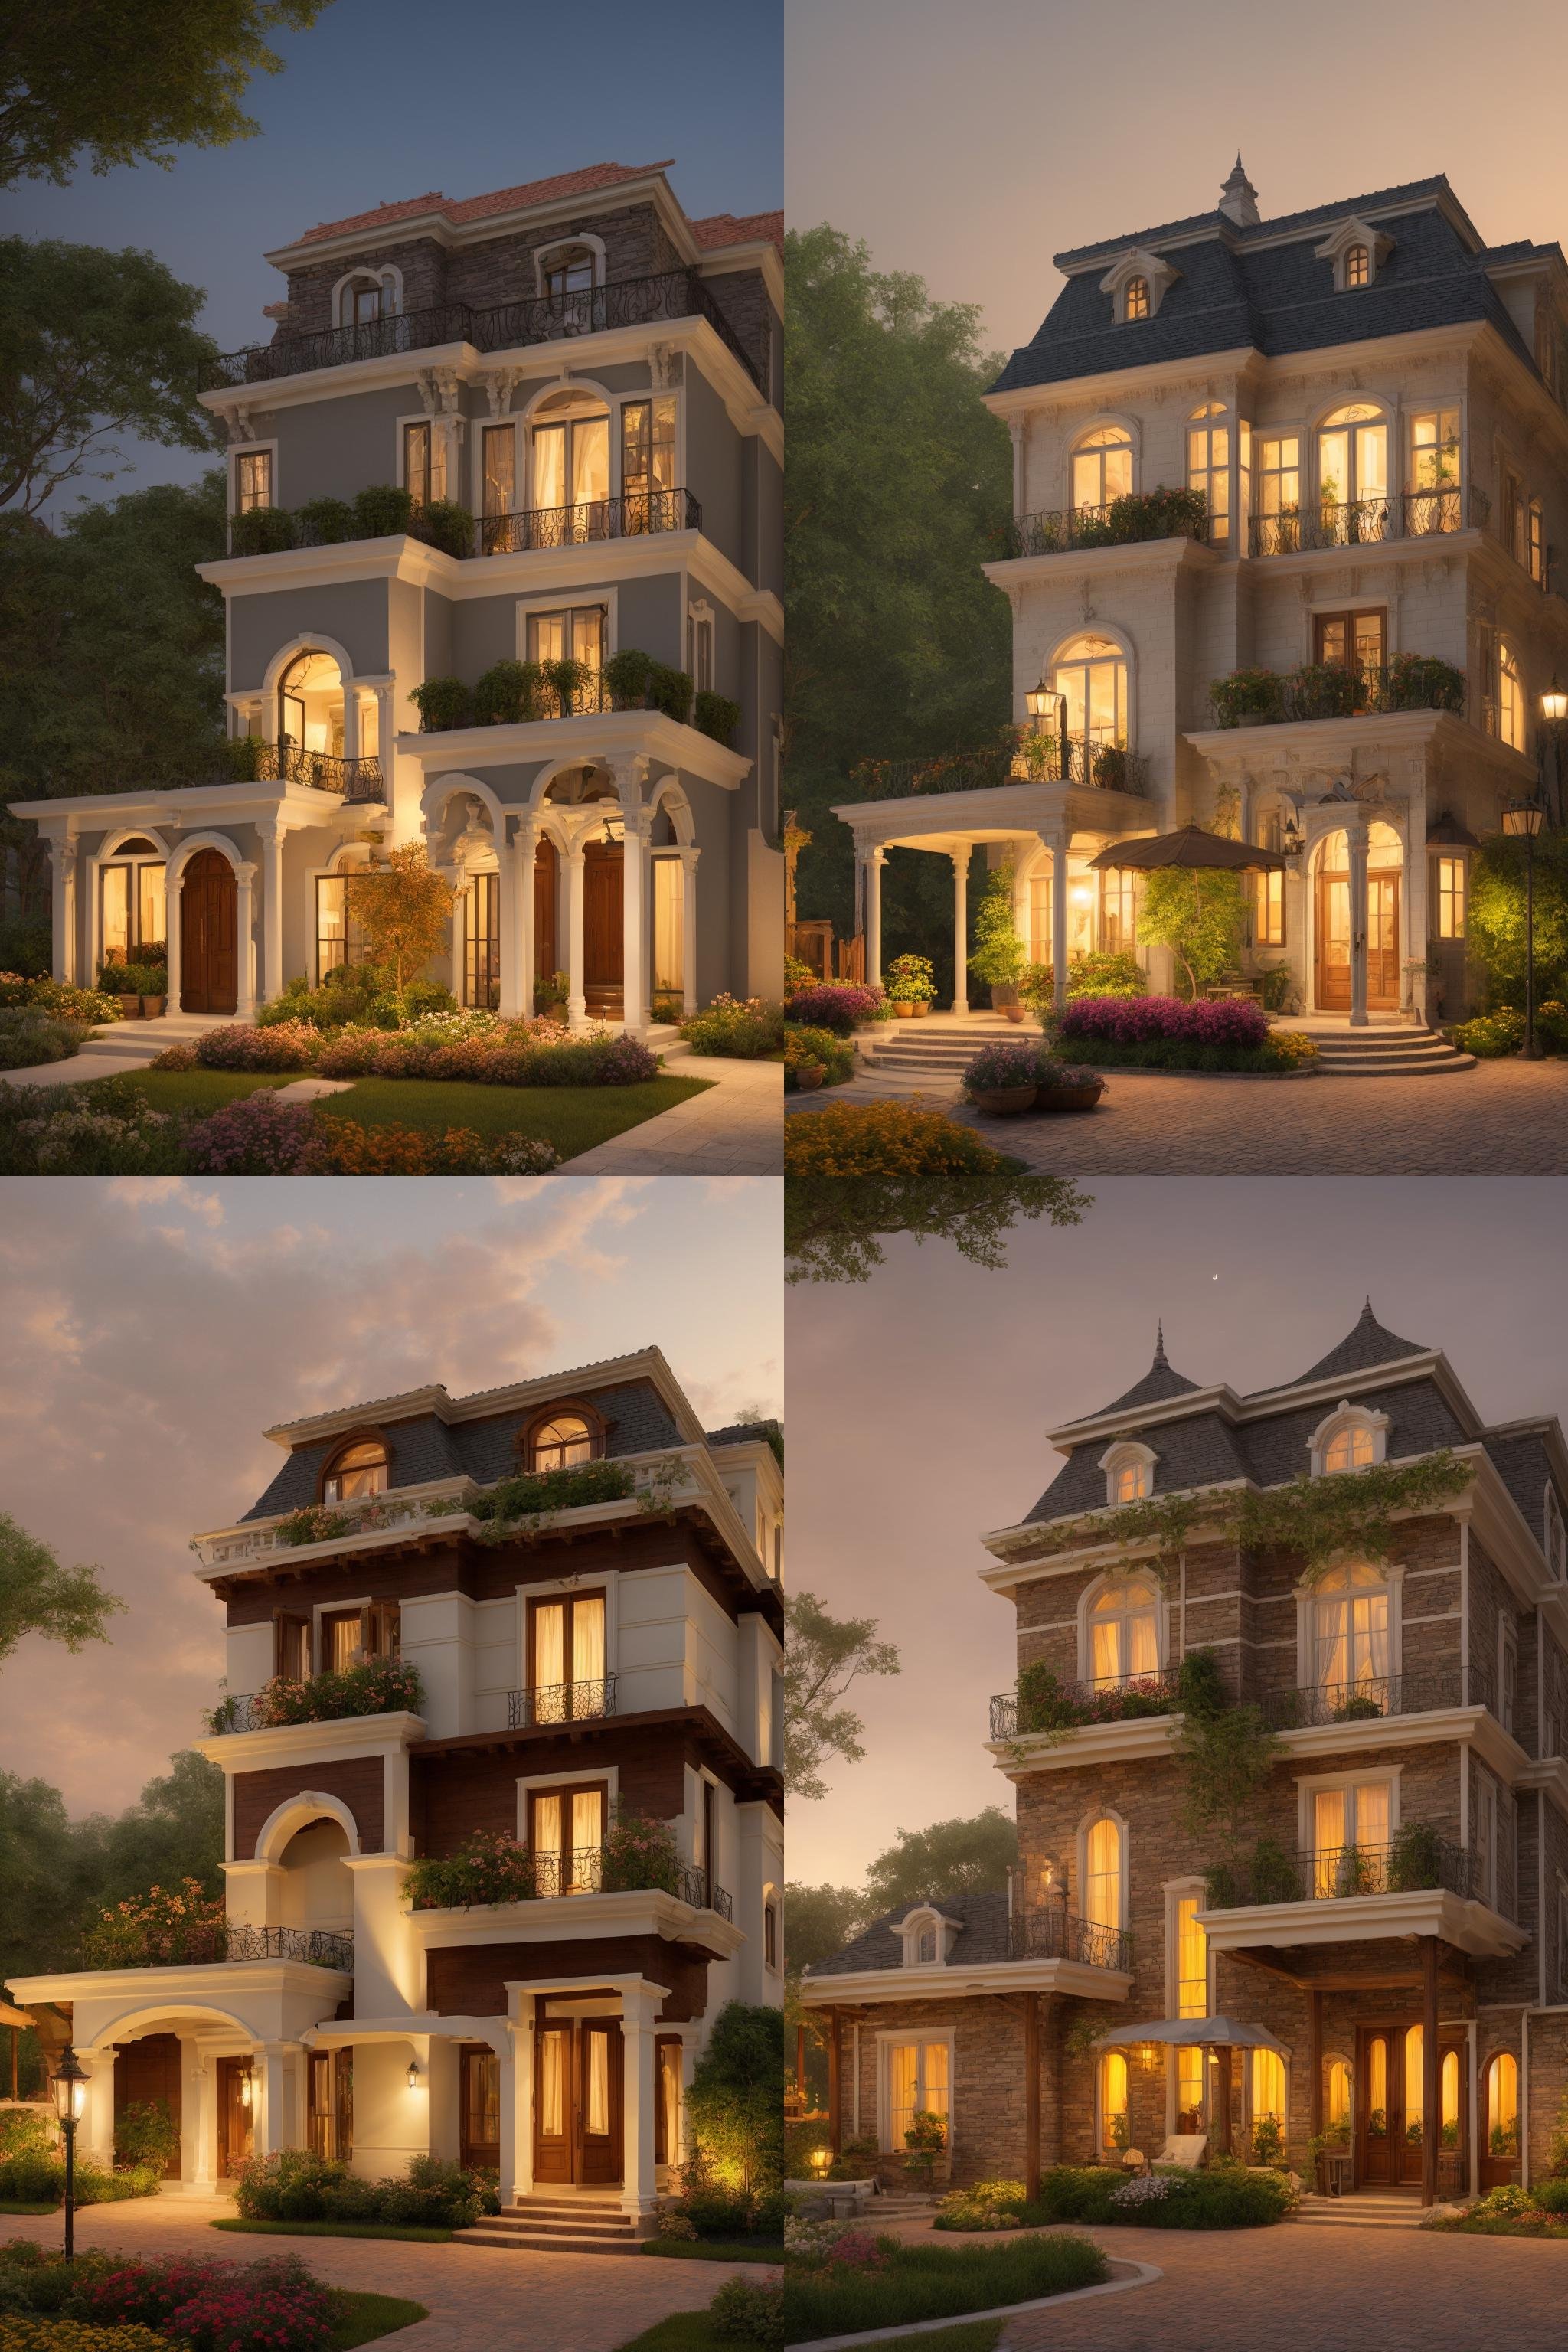 Evoking the essence of a meticulously crafted three-story classical mansion exterior in a digital illustration format. This work draws inspiration from the renowned artist Thomas Kinkade. The mansion is surrounded by a picturesque landscape, each detail carefully rendered, harmonizing nature and architectural grandeur. A balanced color temperature enriches the scene with a golden glow. The characters' faces bear content expressions, mirroring the tranquil ambiance. Illuminated by warm light, the scene imparts a dreamlike quality and a sense of serenity